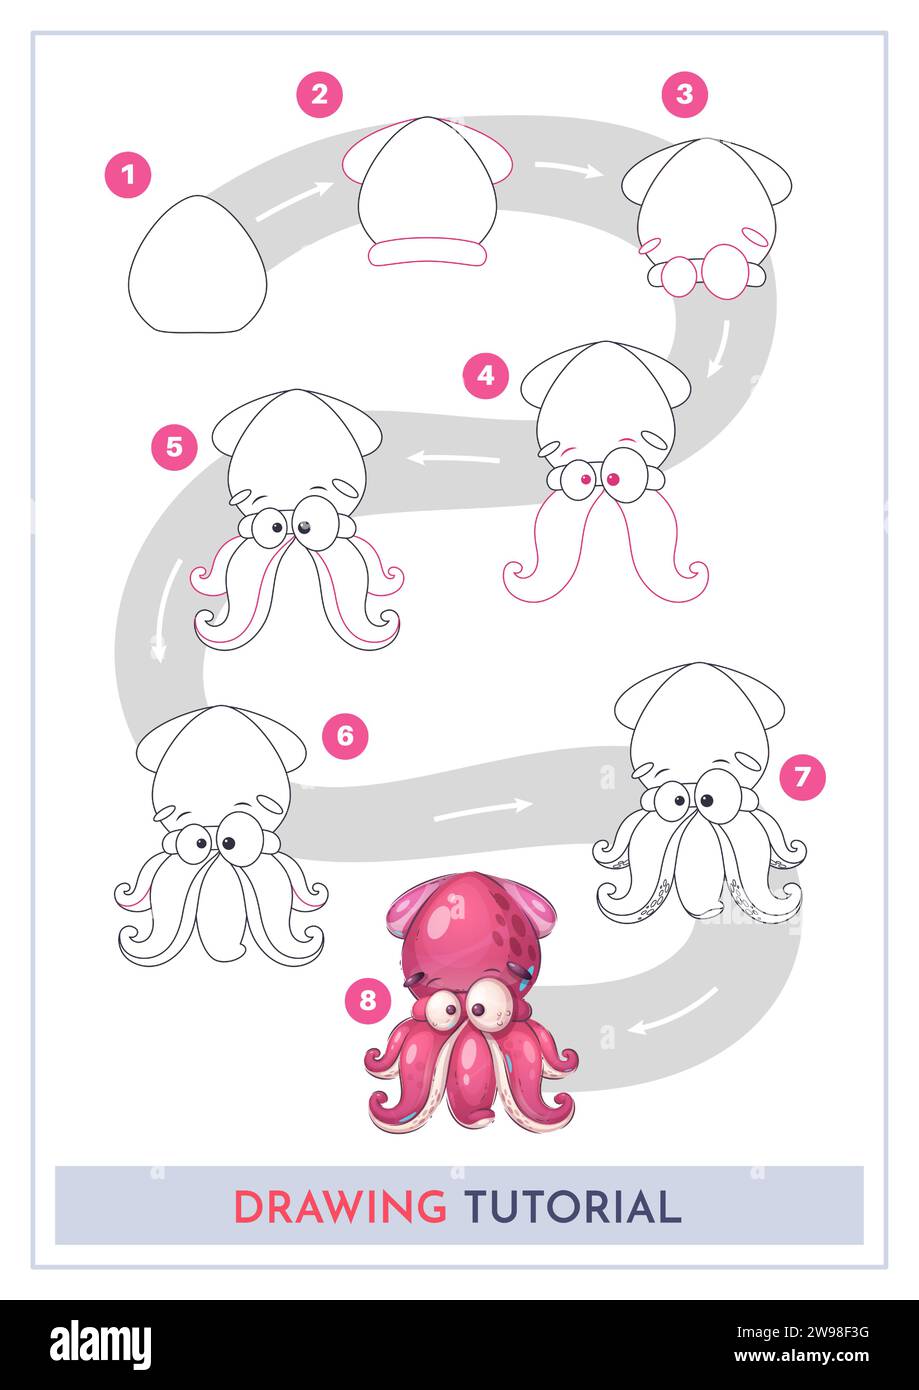 How to Draw a Squid. Step by Step Drawing Tutorial. Draw Guide. Simple Instruction for Kids and Adults. Stock Vector